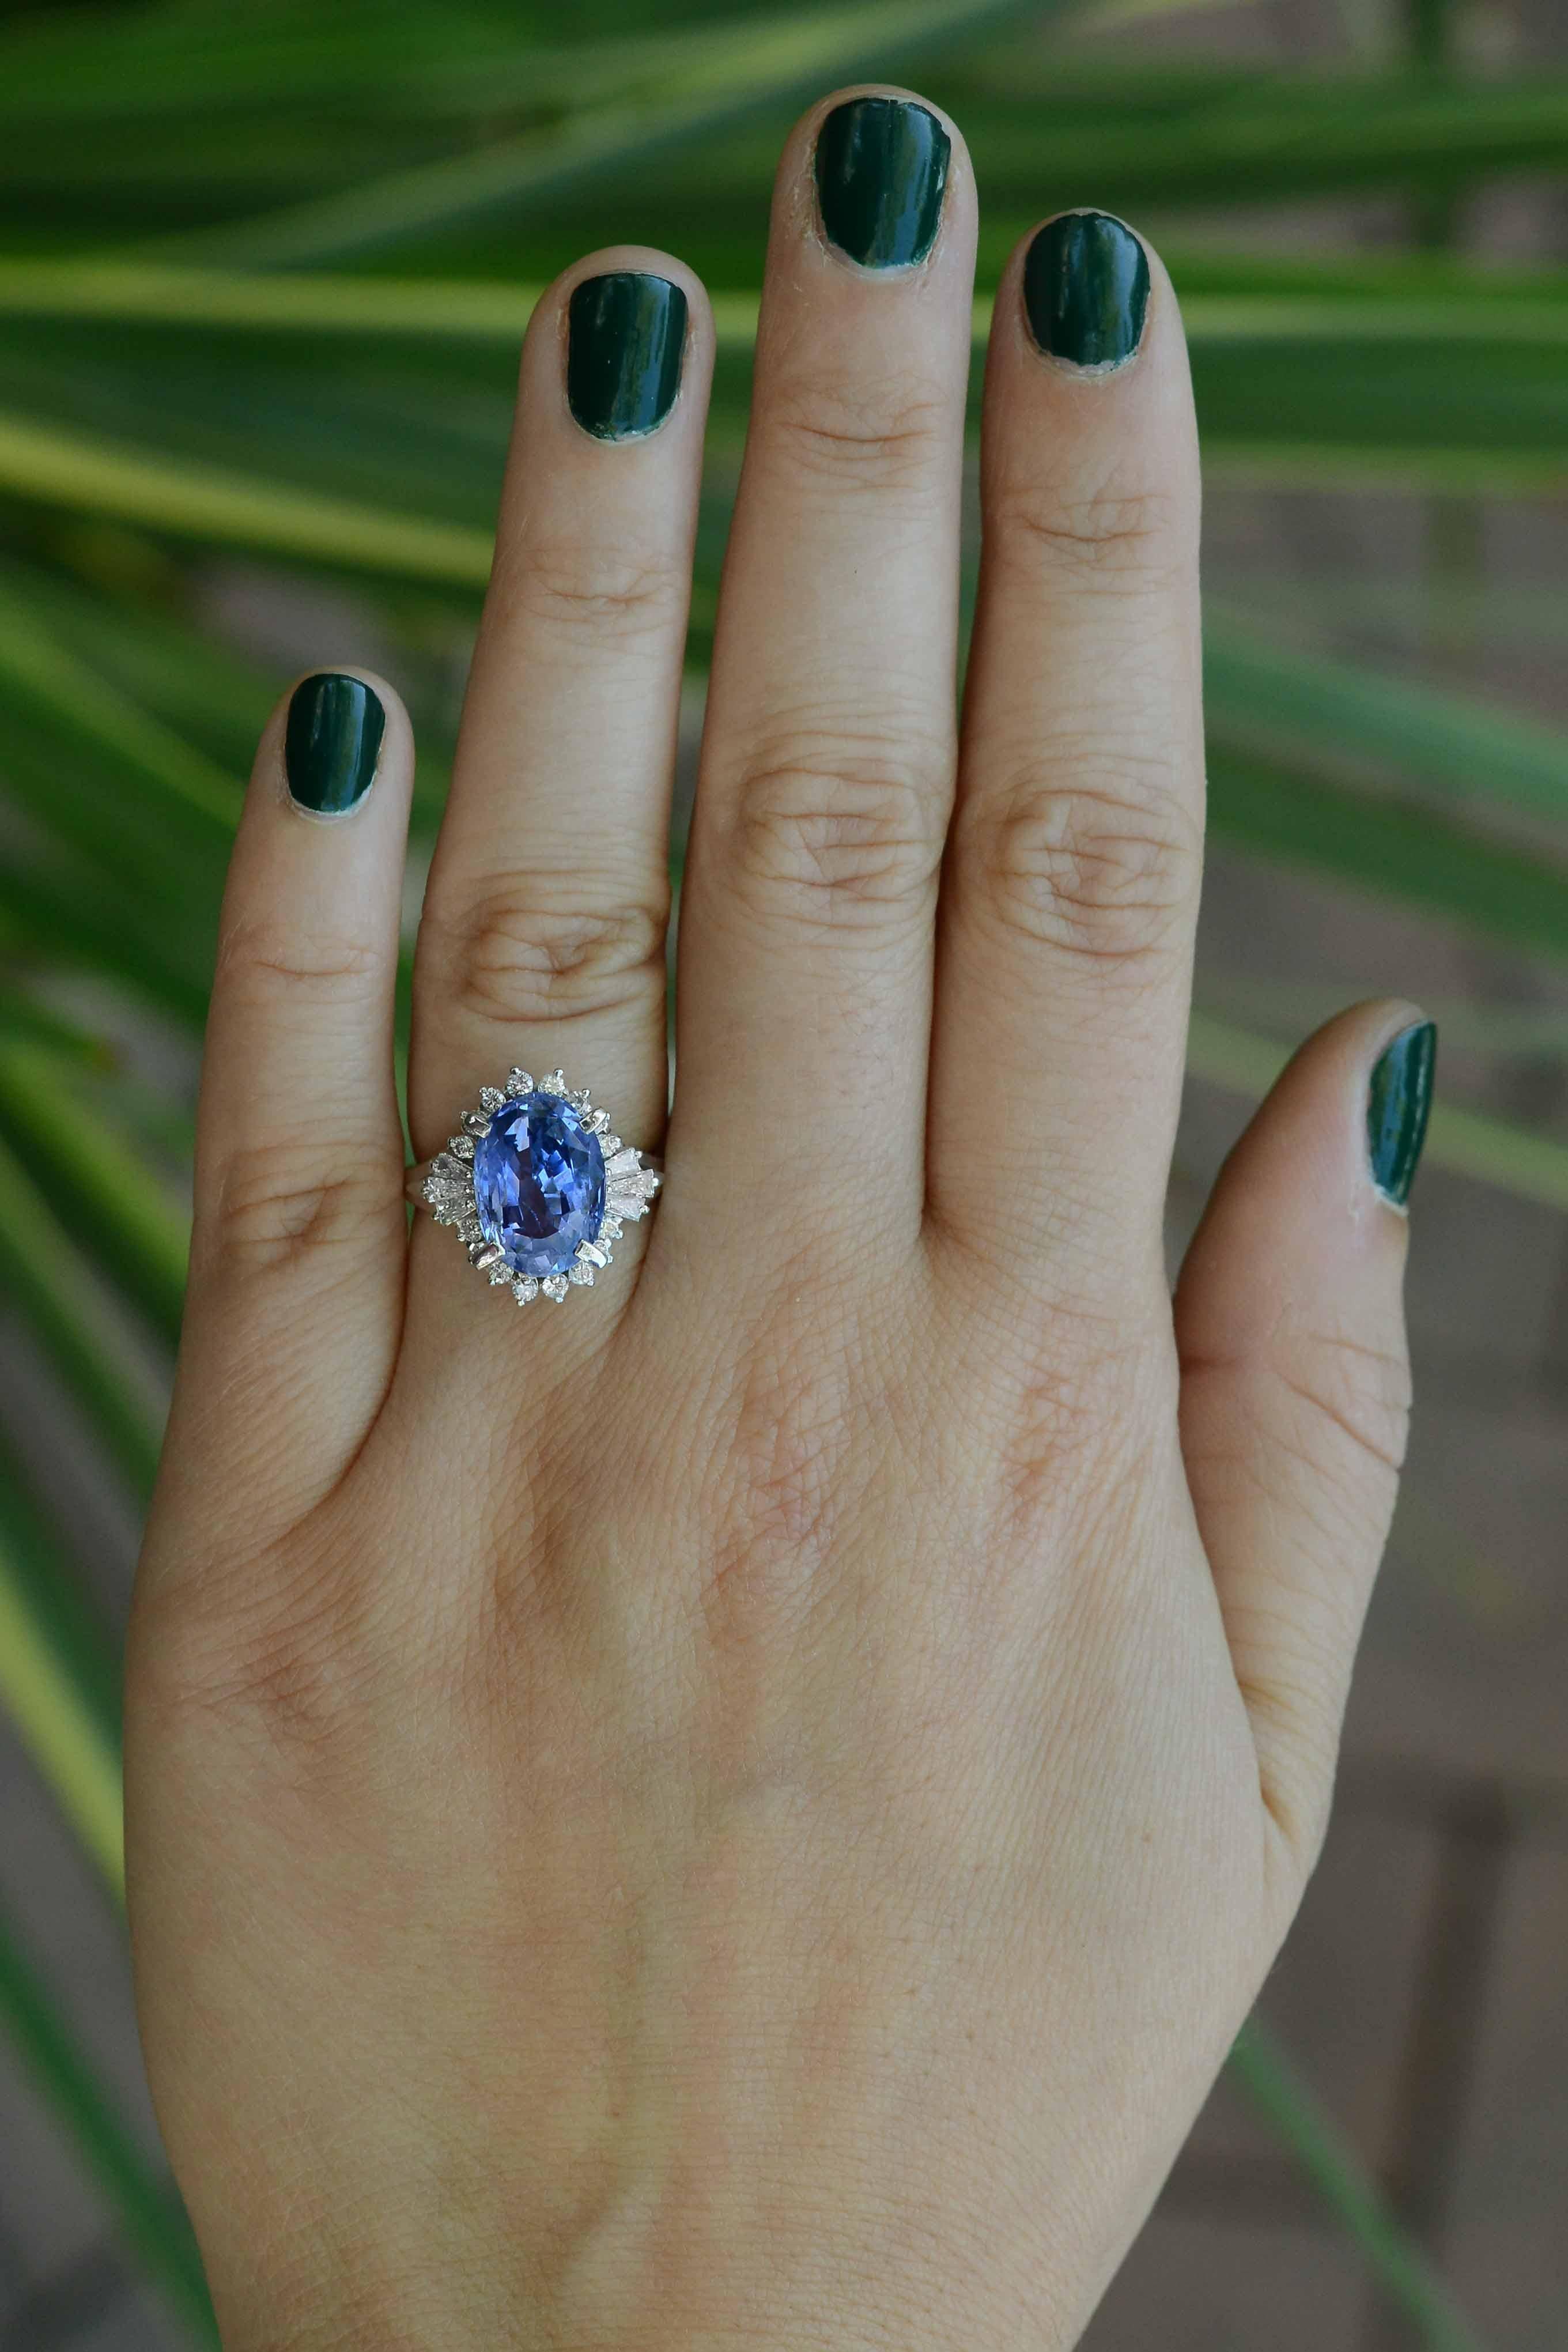 This captivating ring headlines a sizable sapphire that portrays an eye-catching violet color. This uniquely colored gem is set in a ballerina setting that puts on a graceful and elegant show. The baguette diamonds taper and flow into a curve of